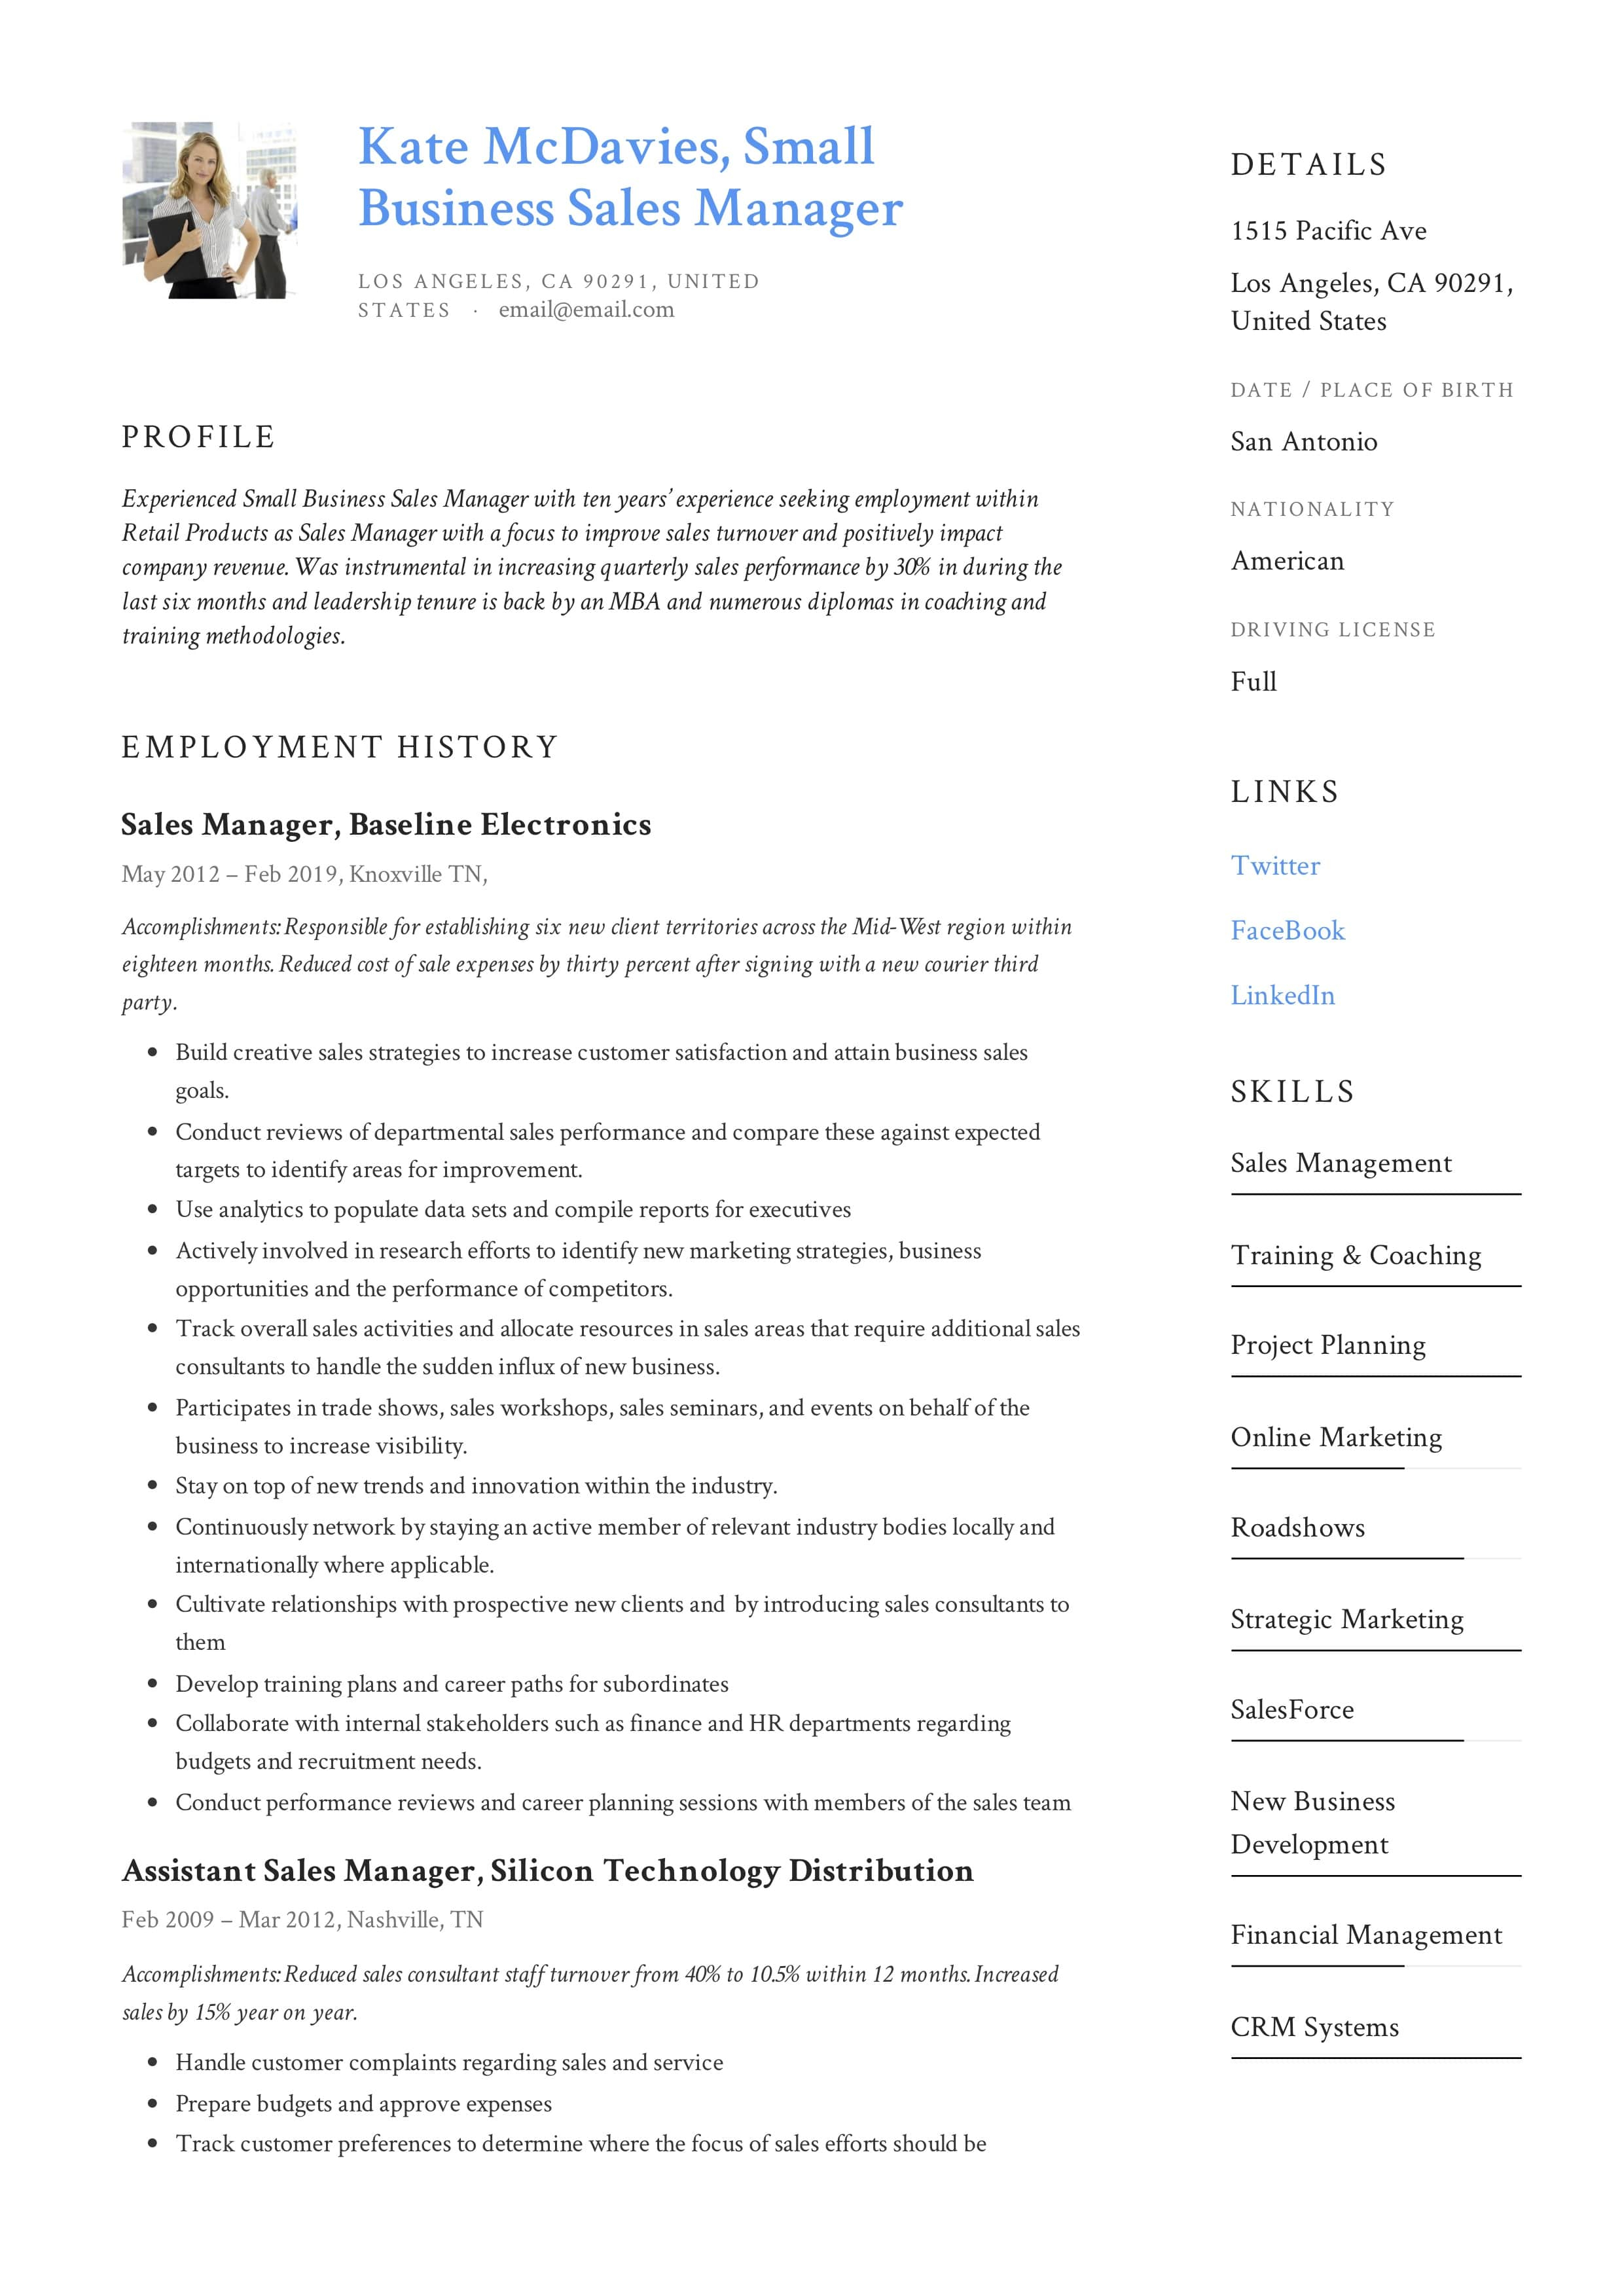 Sales Resume Examples Guide Small Business Sales Manager Resume X12 Sample Pdf 2019